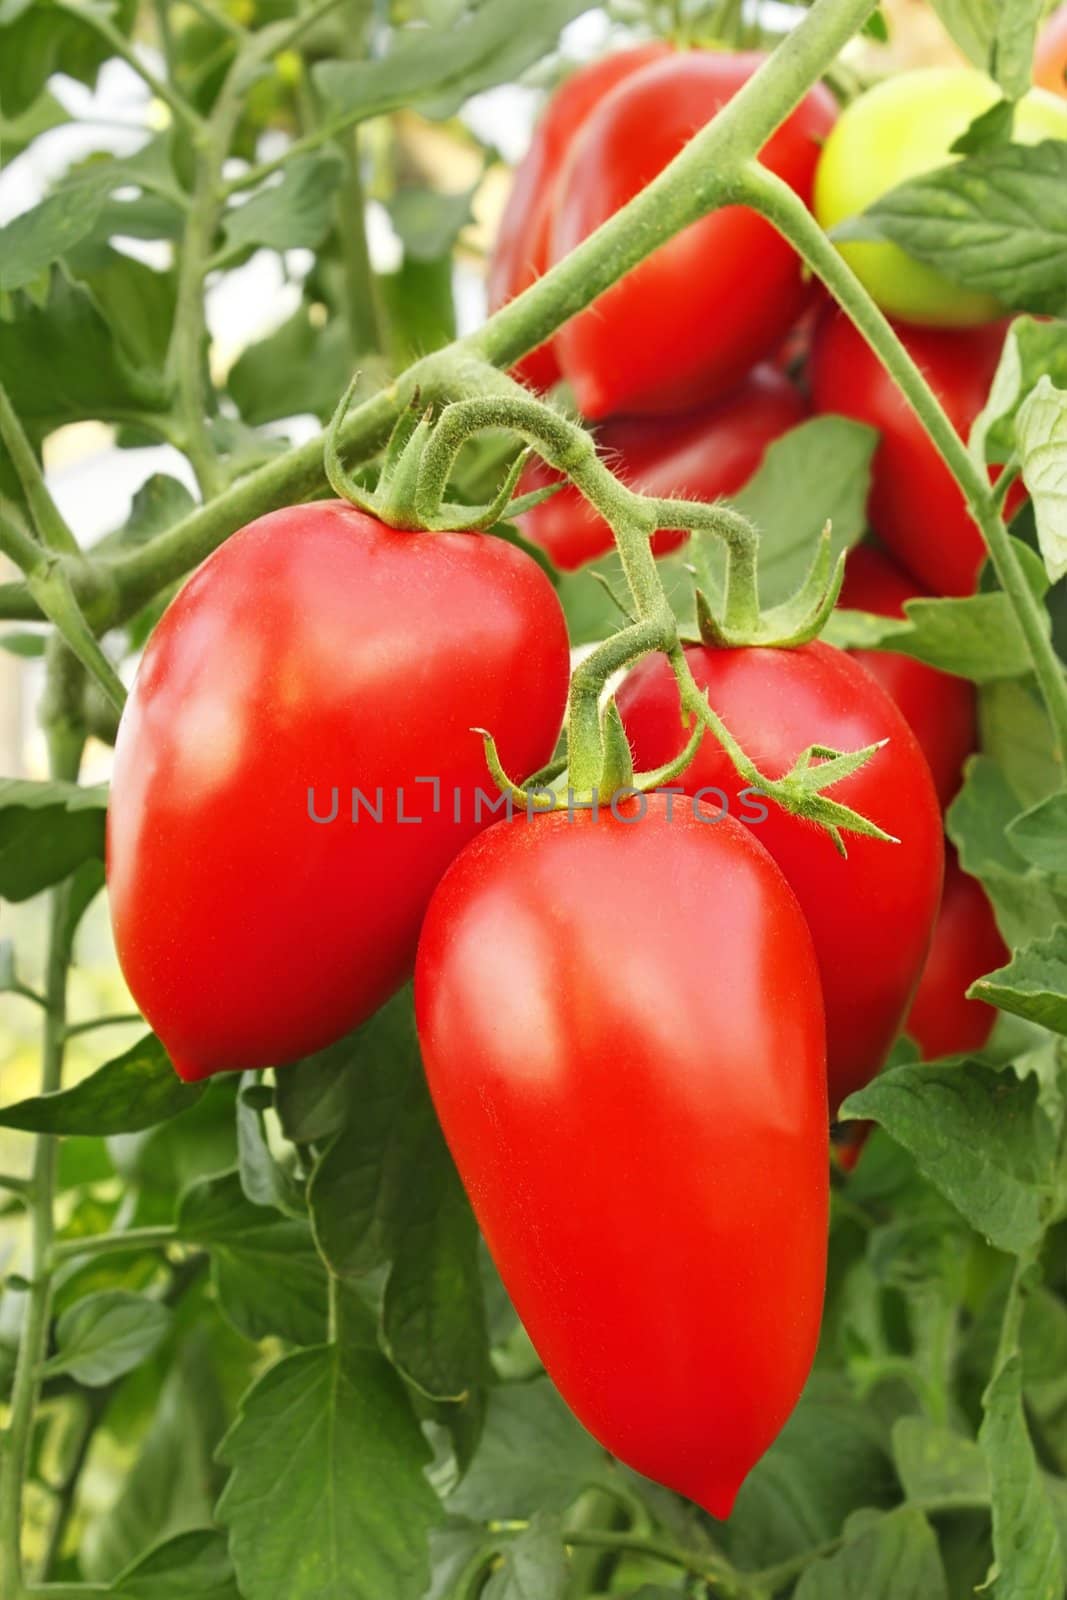 Red tomatoes in greenhouse by qiiip